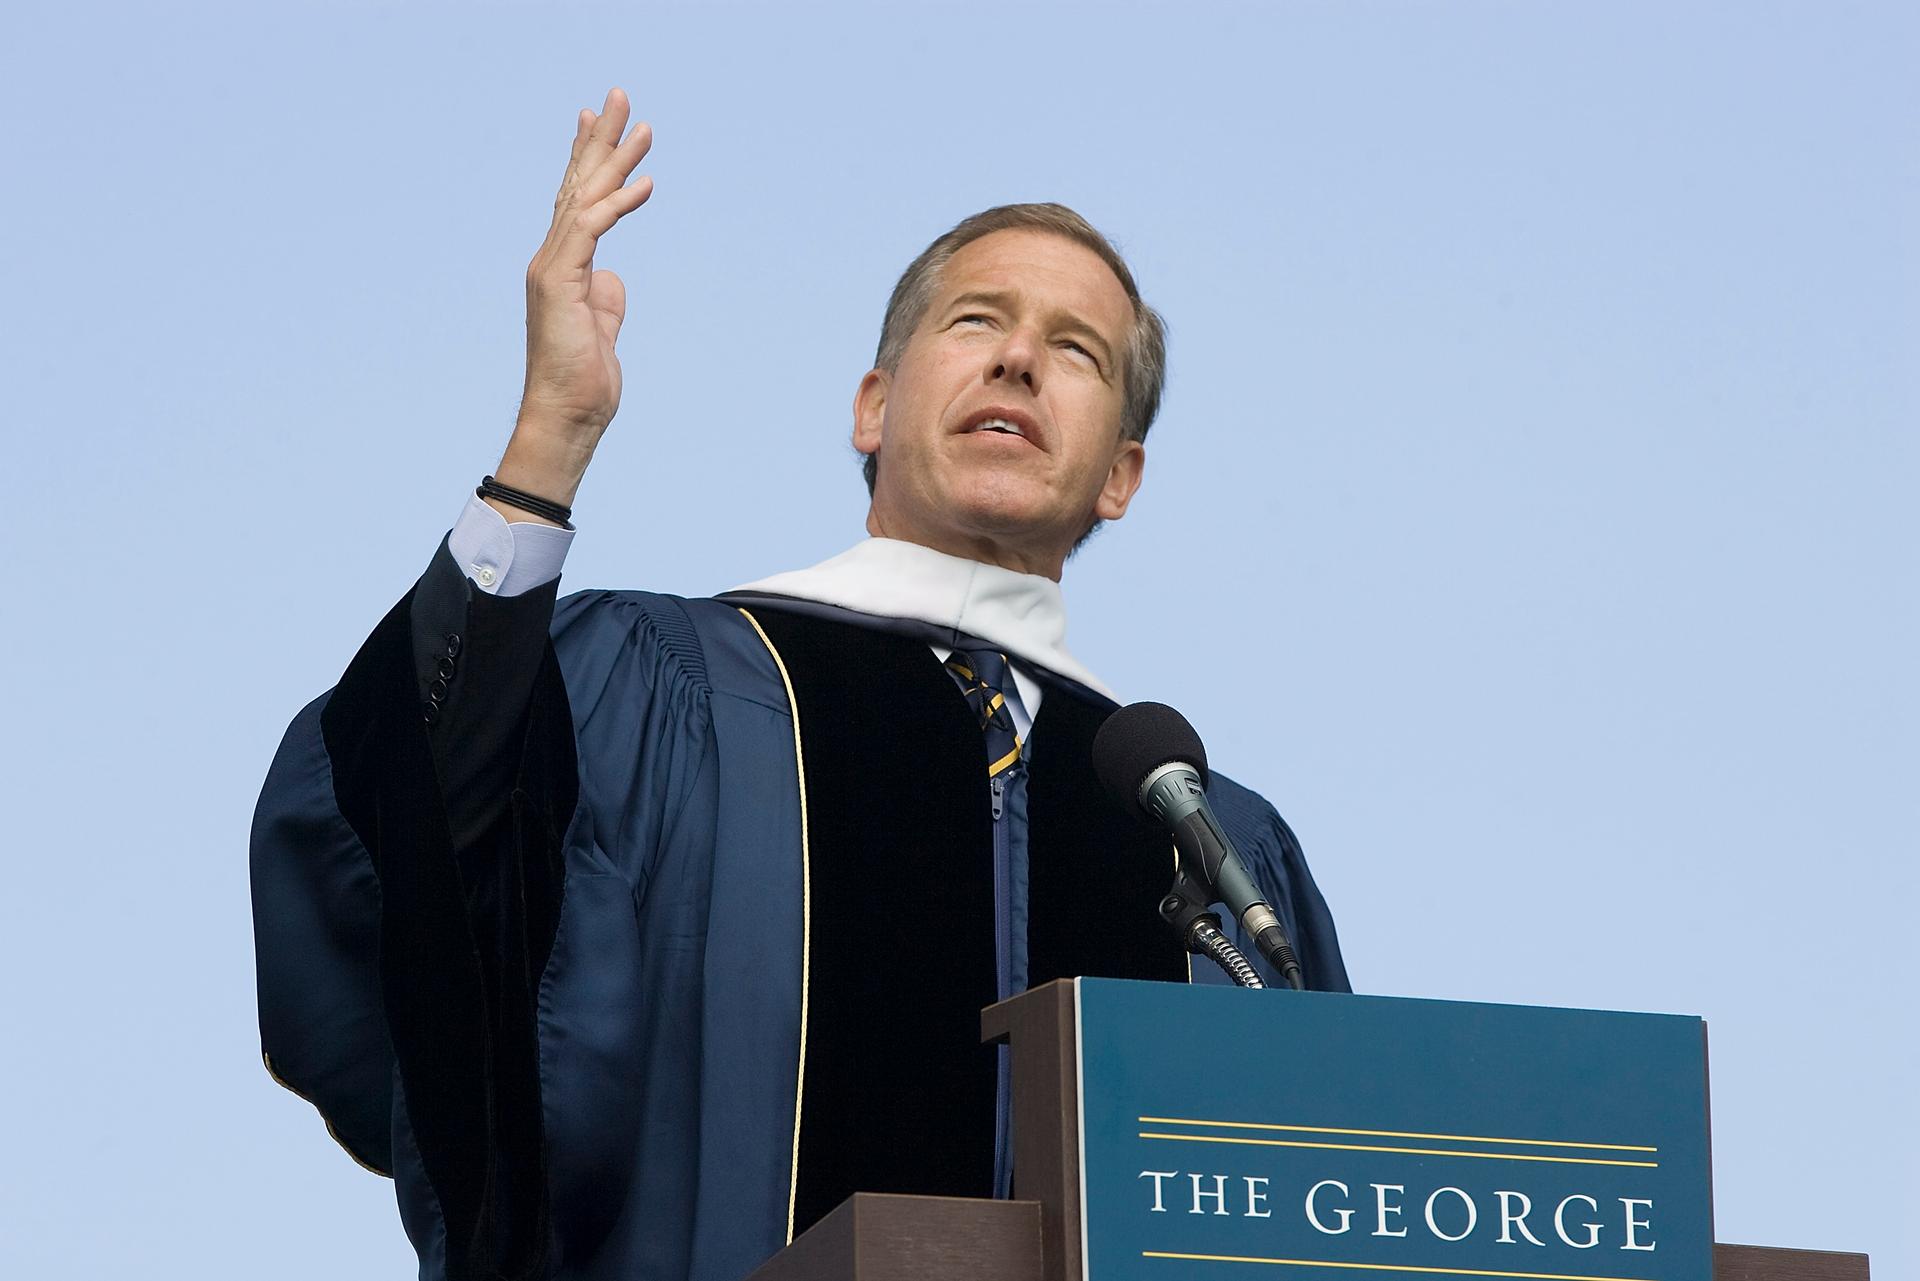 NBC News anchor Brian Williams delivers remarks after receiving an honorary doctorate at George Washington University in 2012.